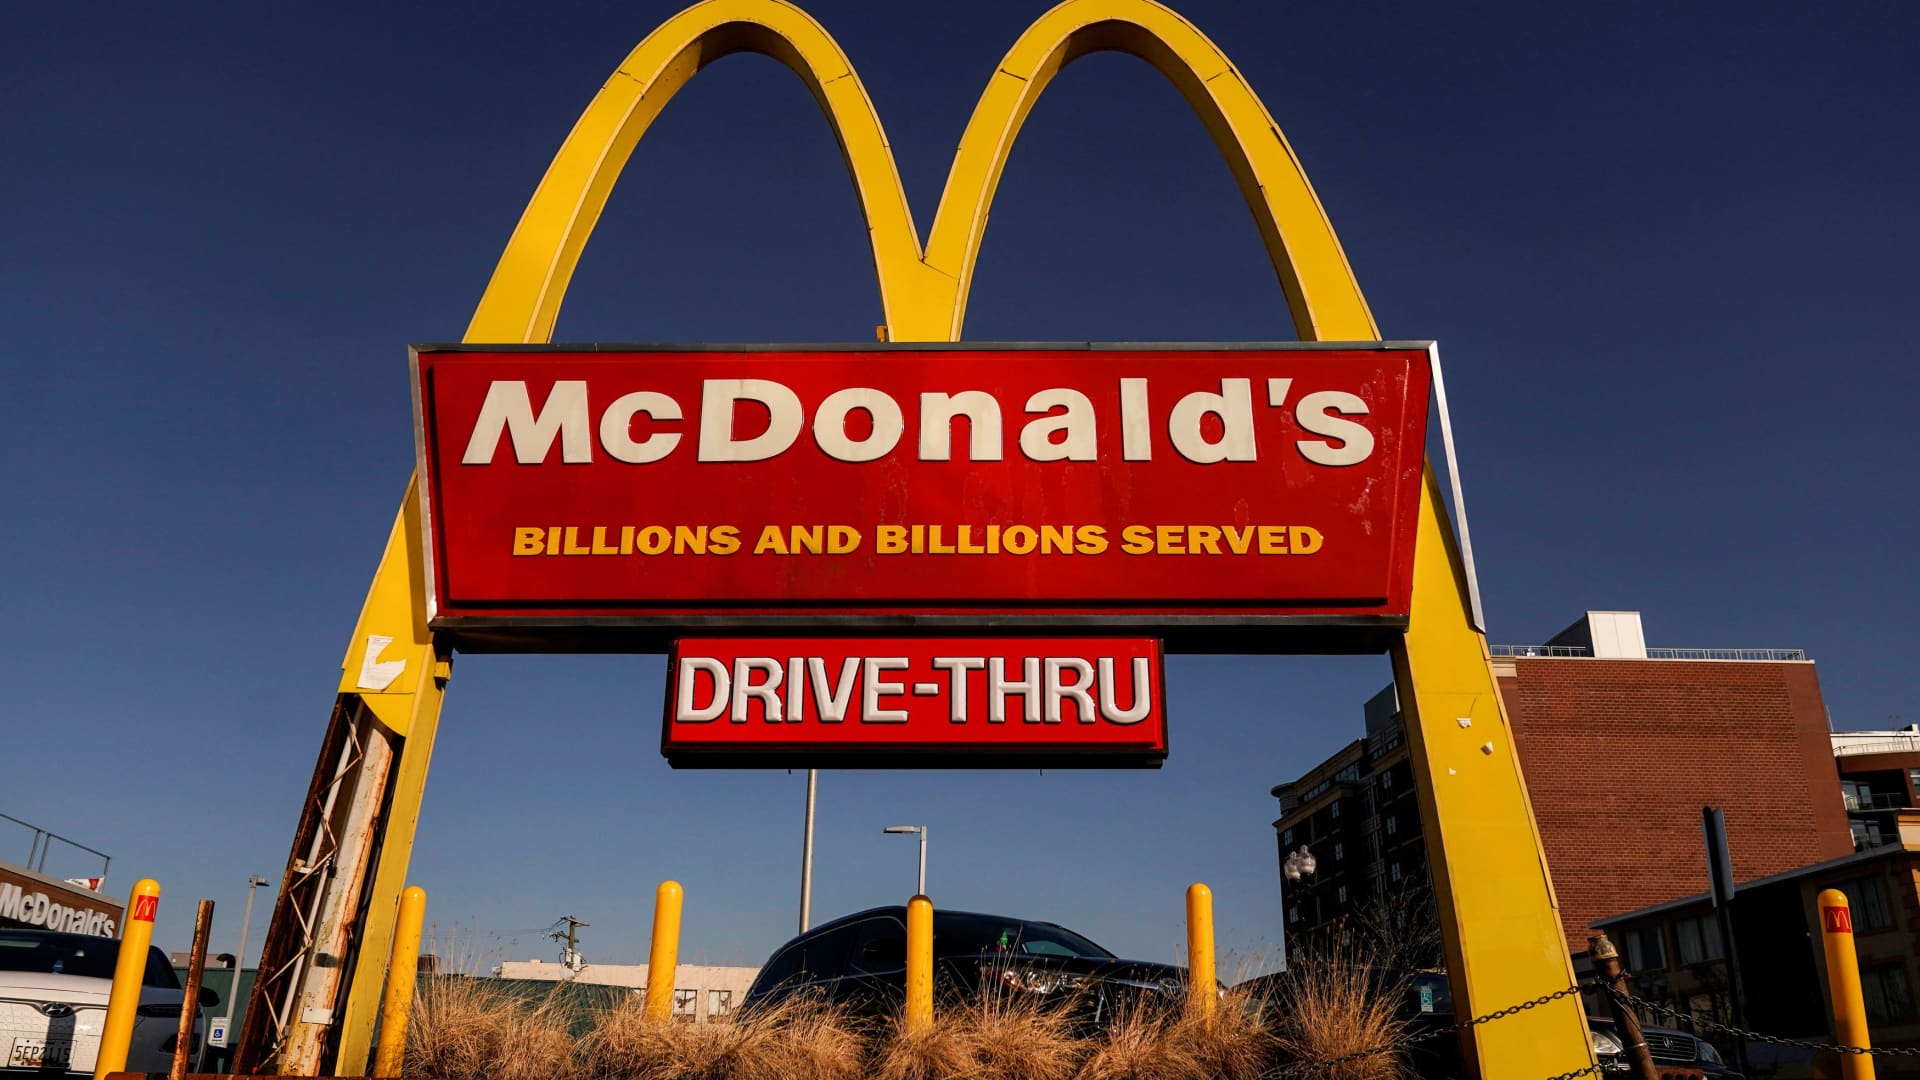 McDonald's simplifies franchising policies to attract more diverse candidates